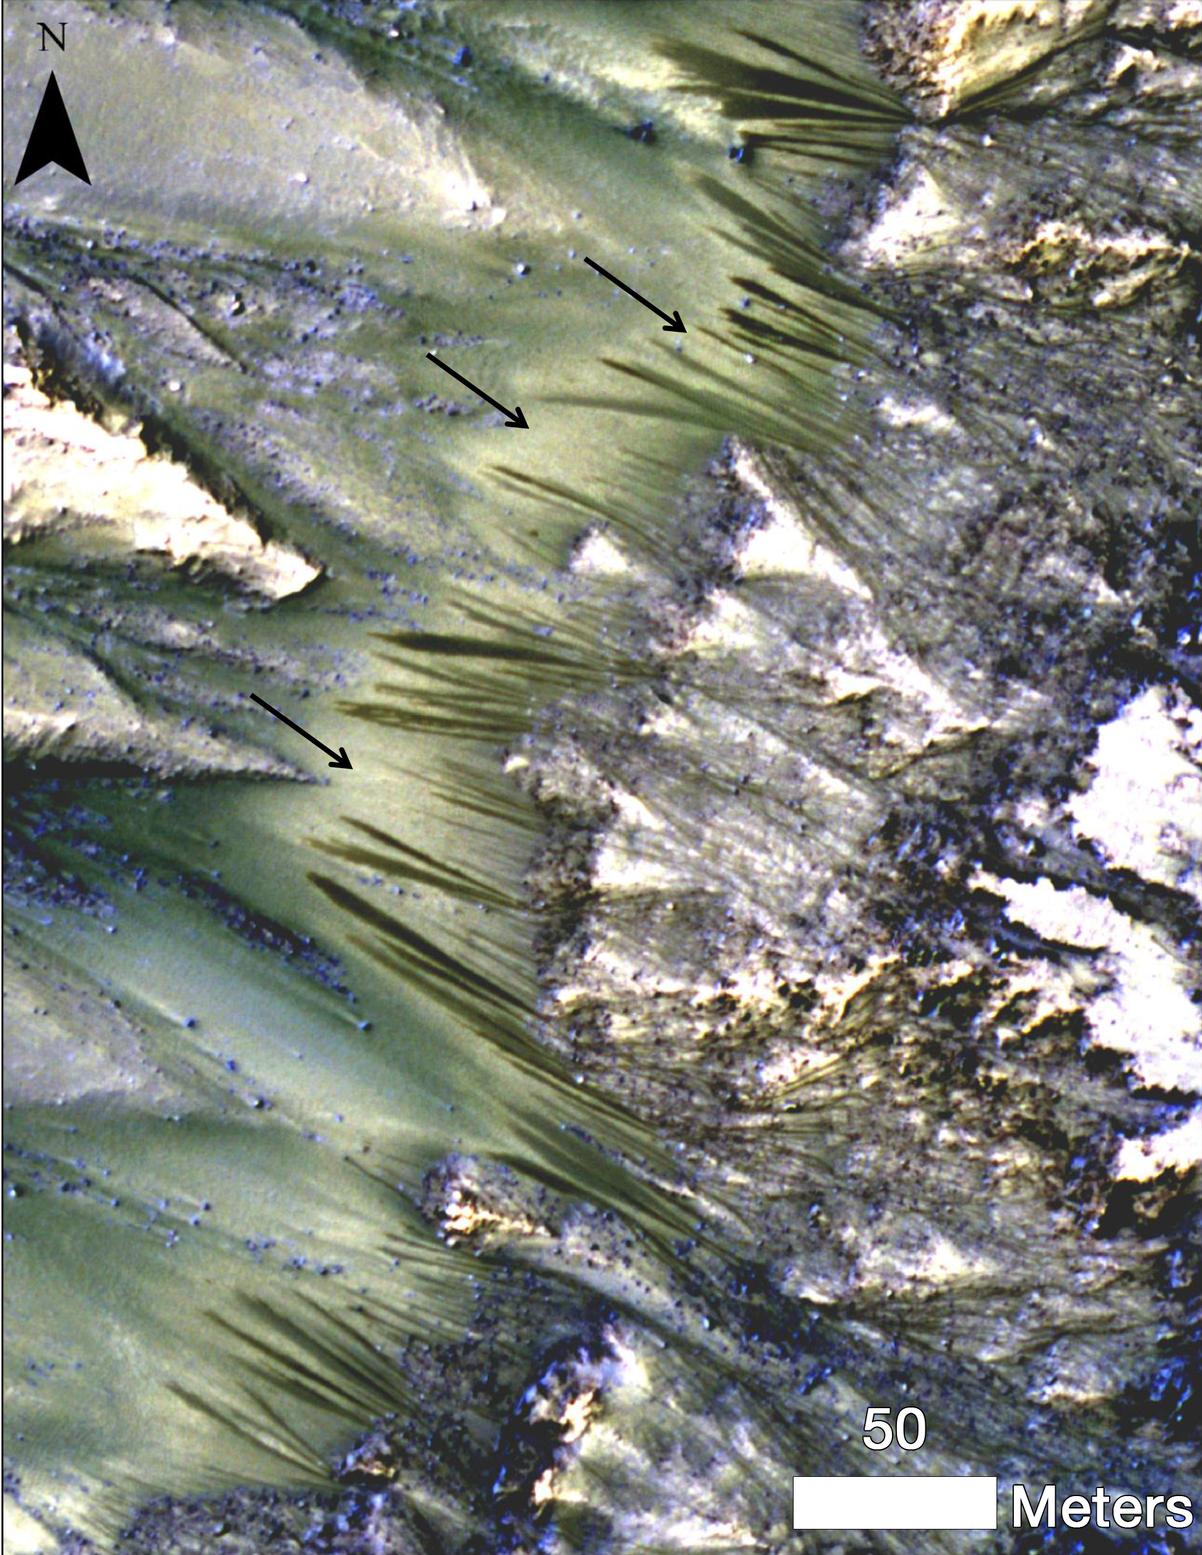 Dark, seasonal flows emanate from bedrock exposures at Palikir Crater on Mars in this image from the High Resolution Imaging Science Experiment (HiRISE) camera on NASA's Mars Reconnaissance Orbiter.